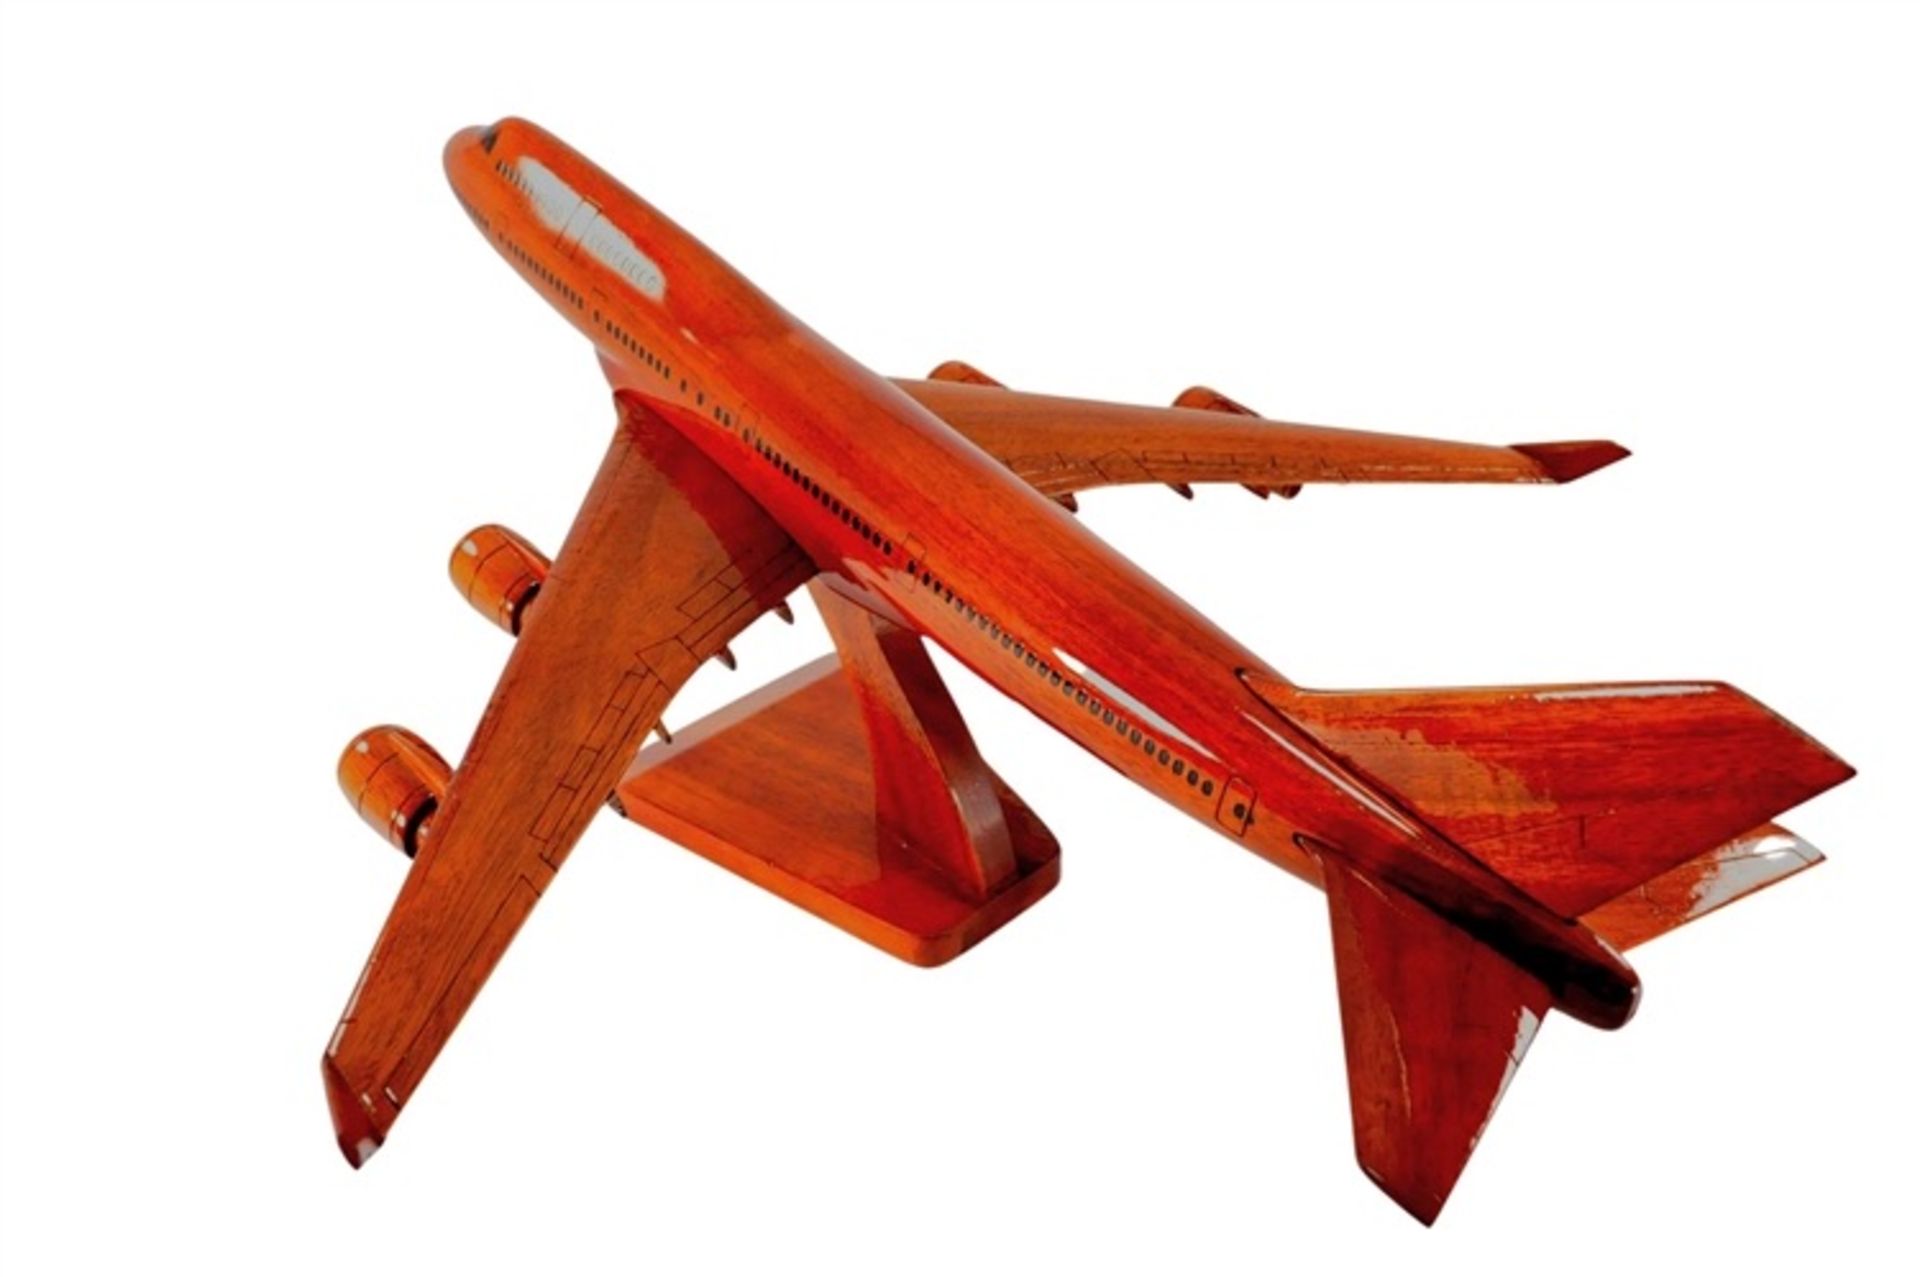 Boeing 747 Wooden Scale Desk Display - Image 3 of 4